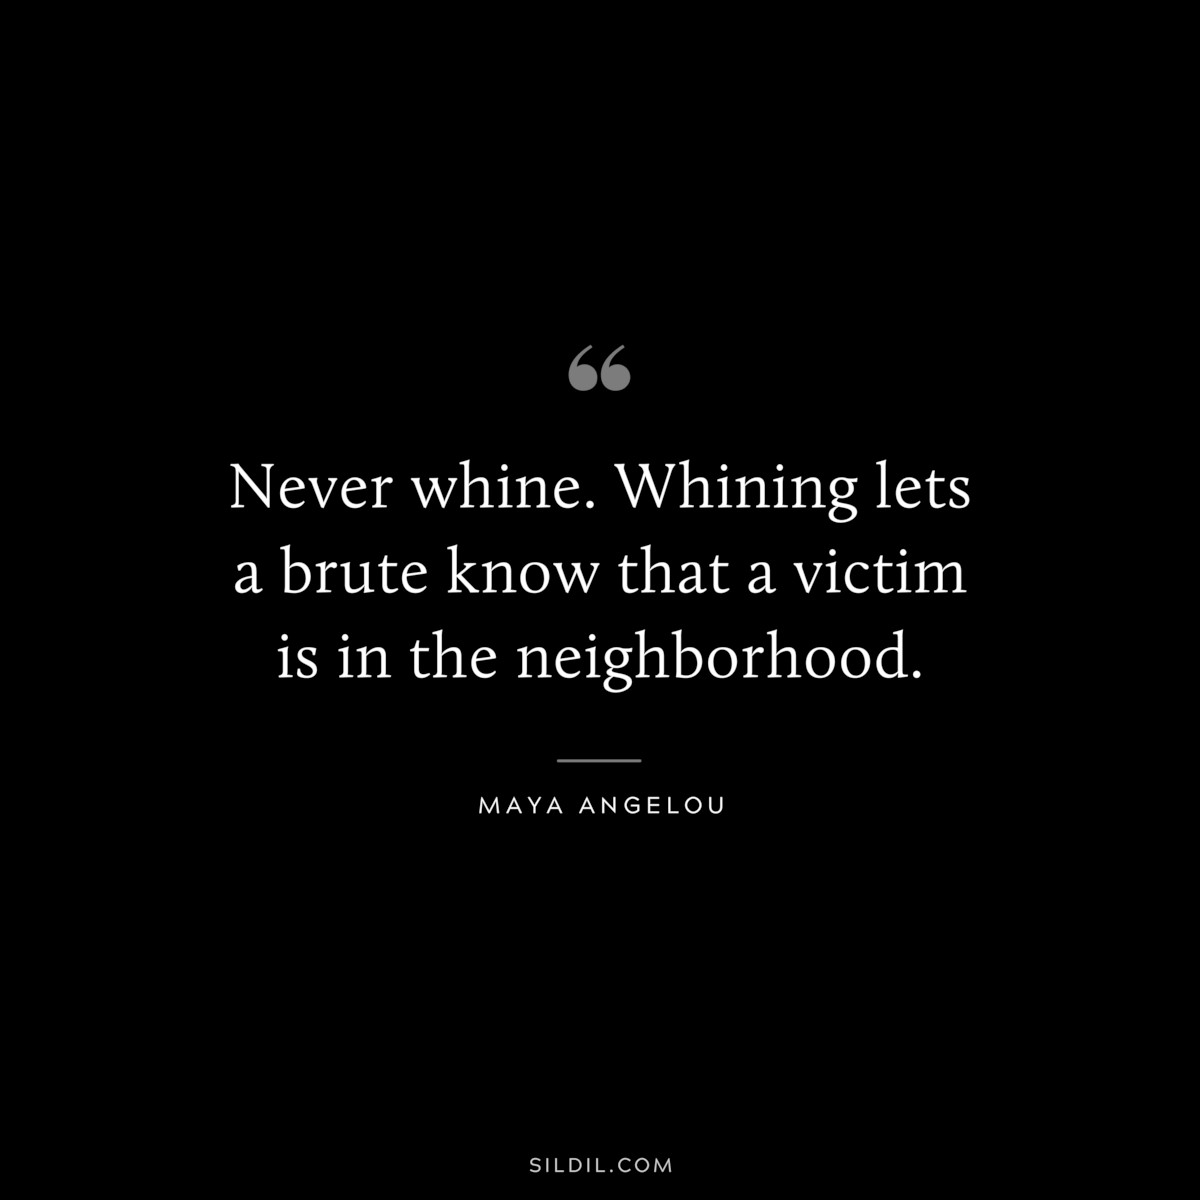 Never whine. Whining lets a brute know that a victim is in the neighborhood. ― Maya Angelou